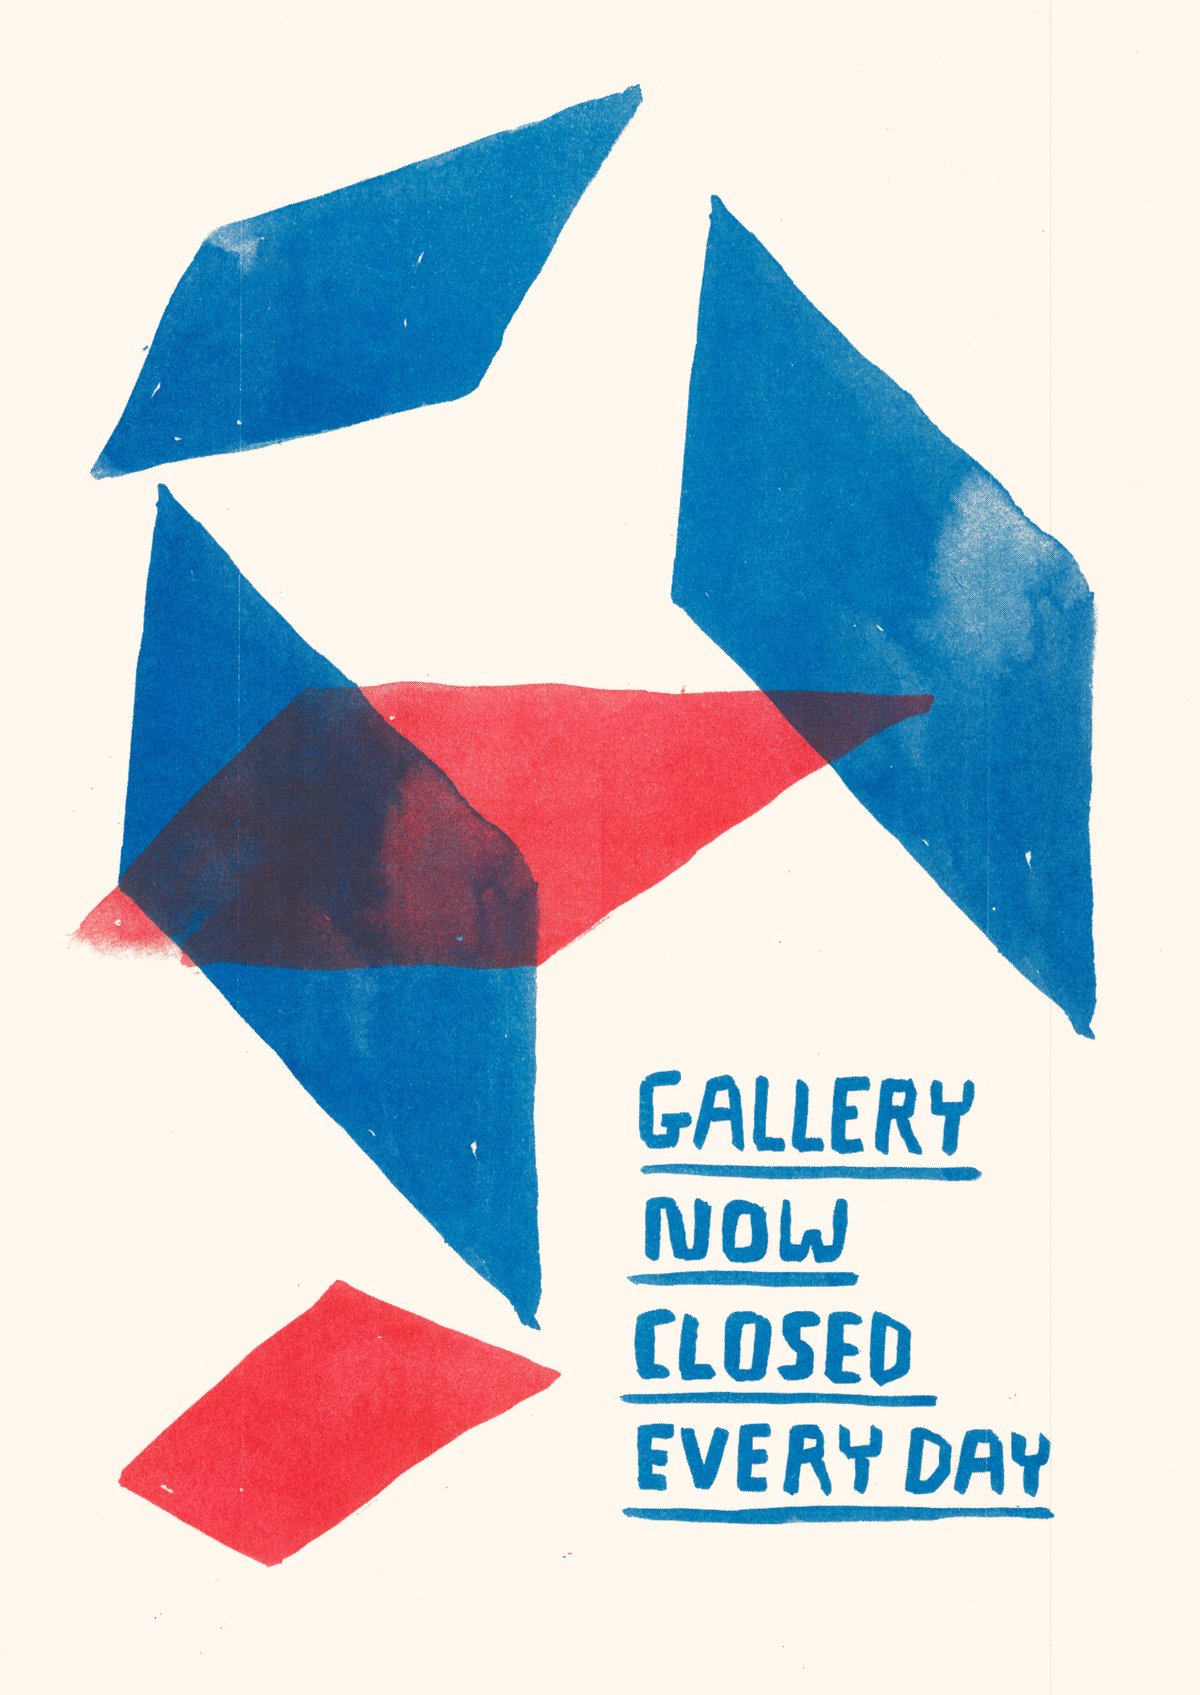 Image of Gallery now closed everyday